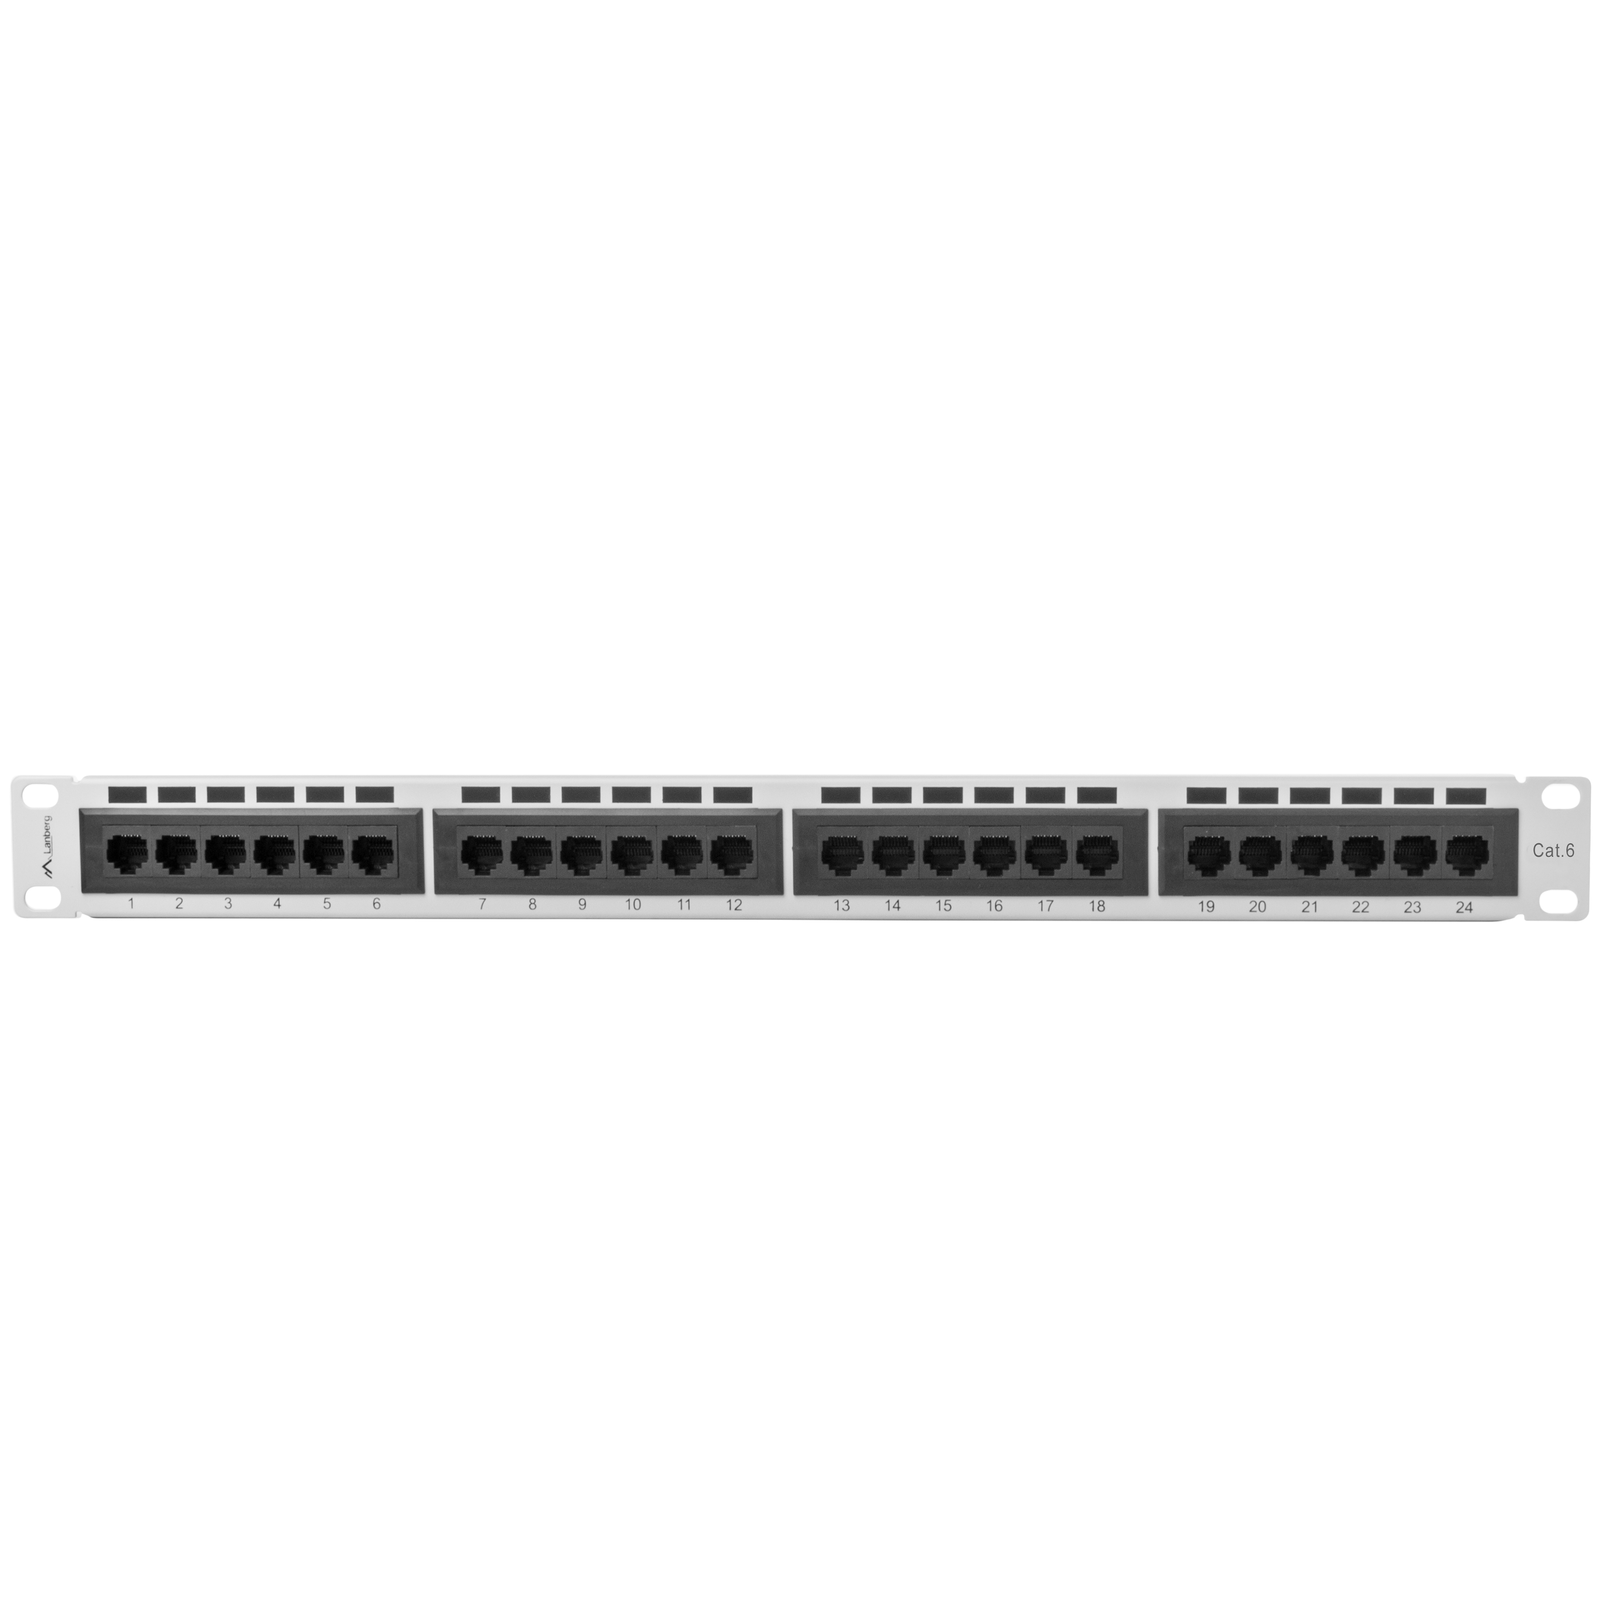 Patch panel 19 white 24 RJ45 CAT.6 UTP 1U Lanberg PPU6-1024-S - Cablematic